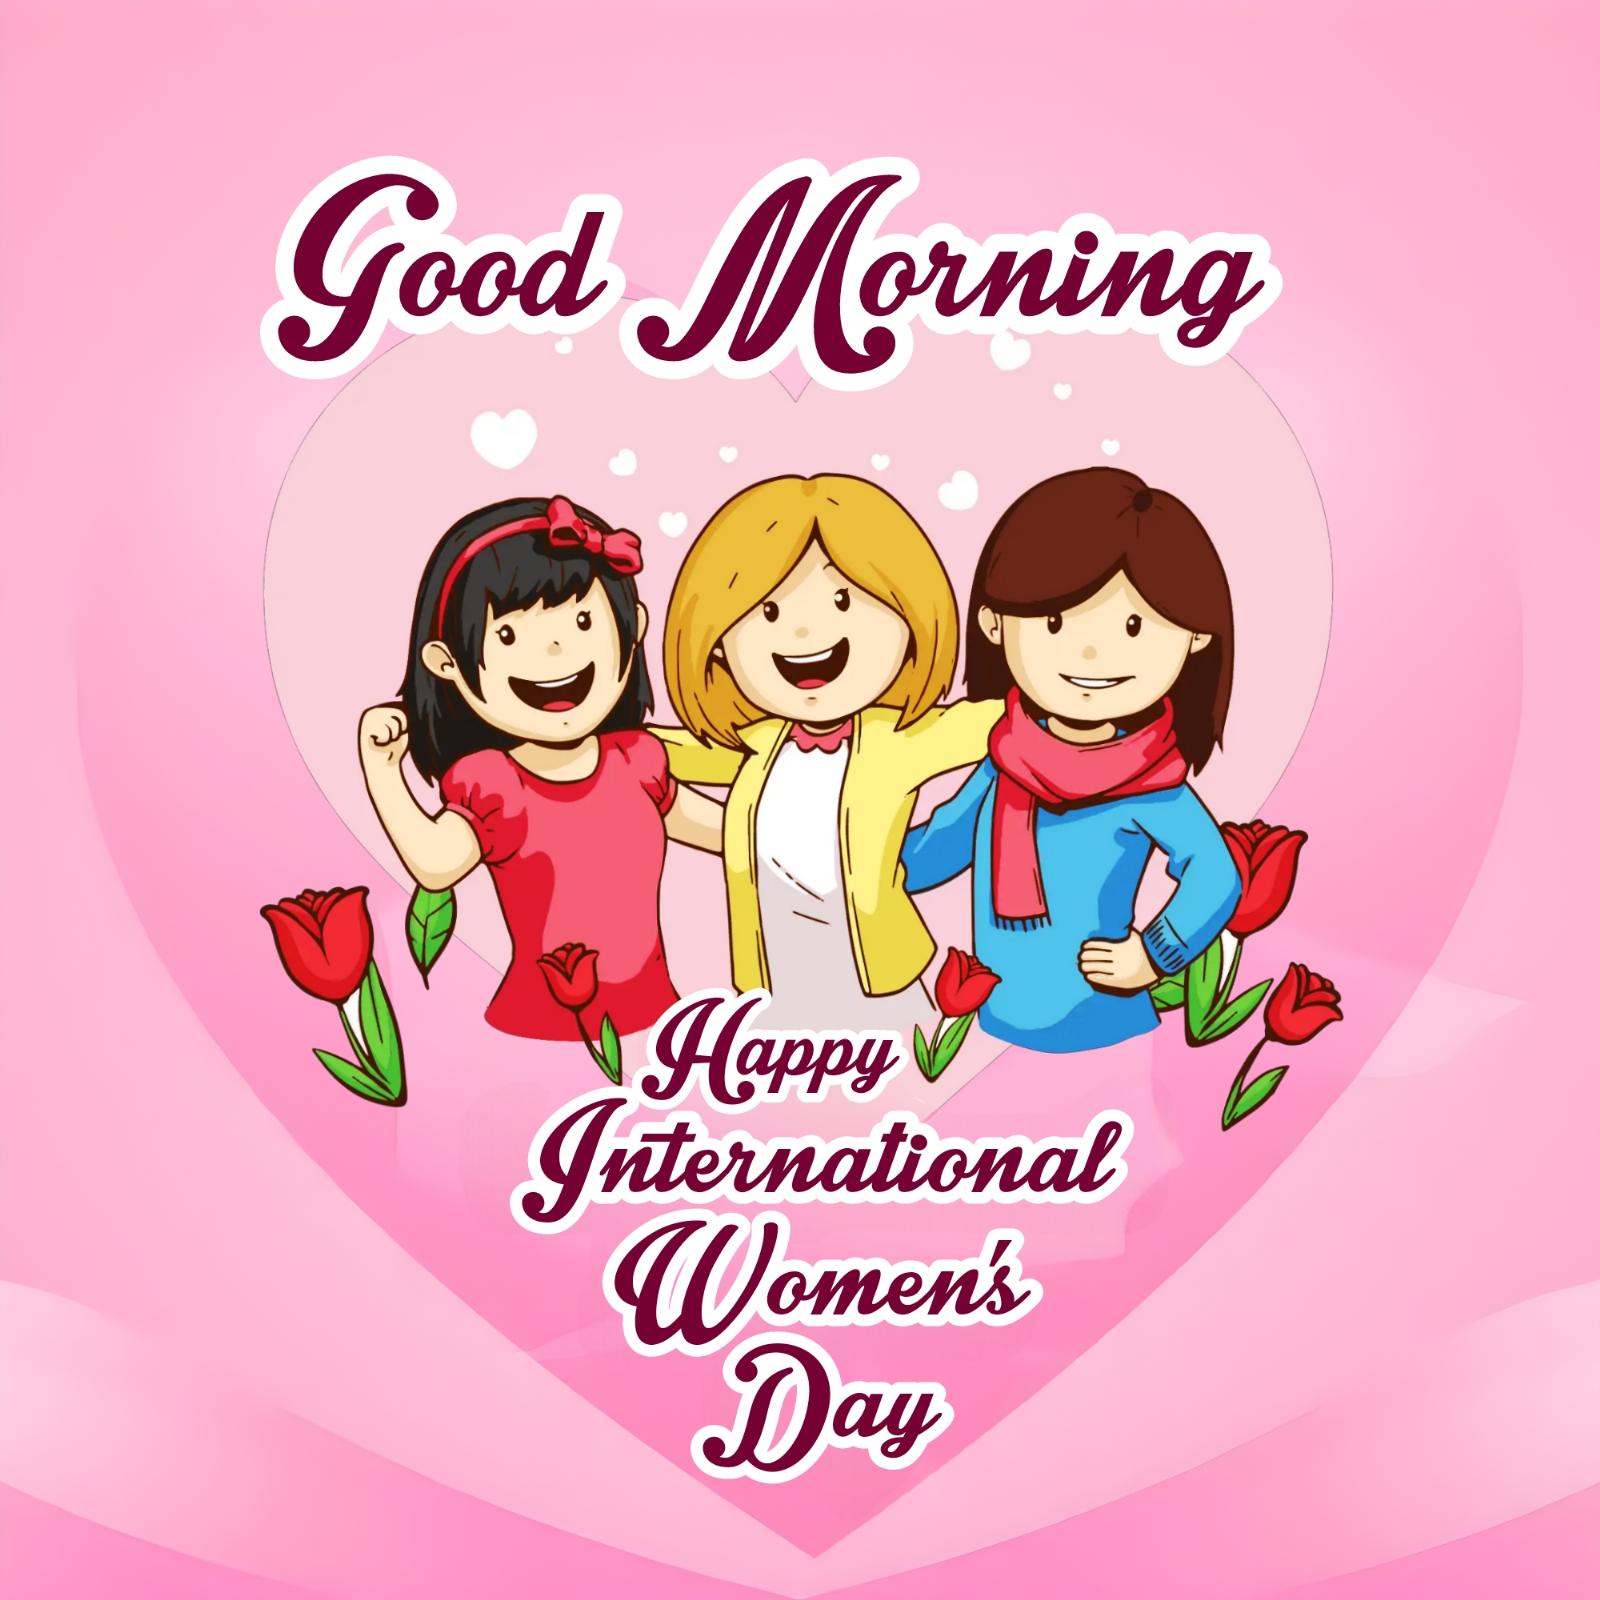 Good Morning Happy International Womens Day Images